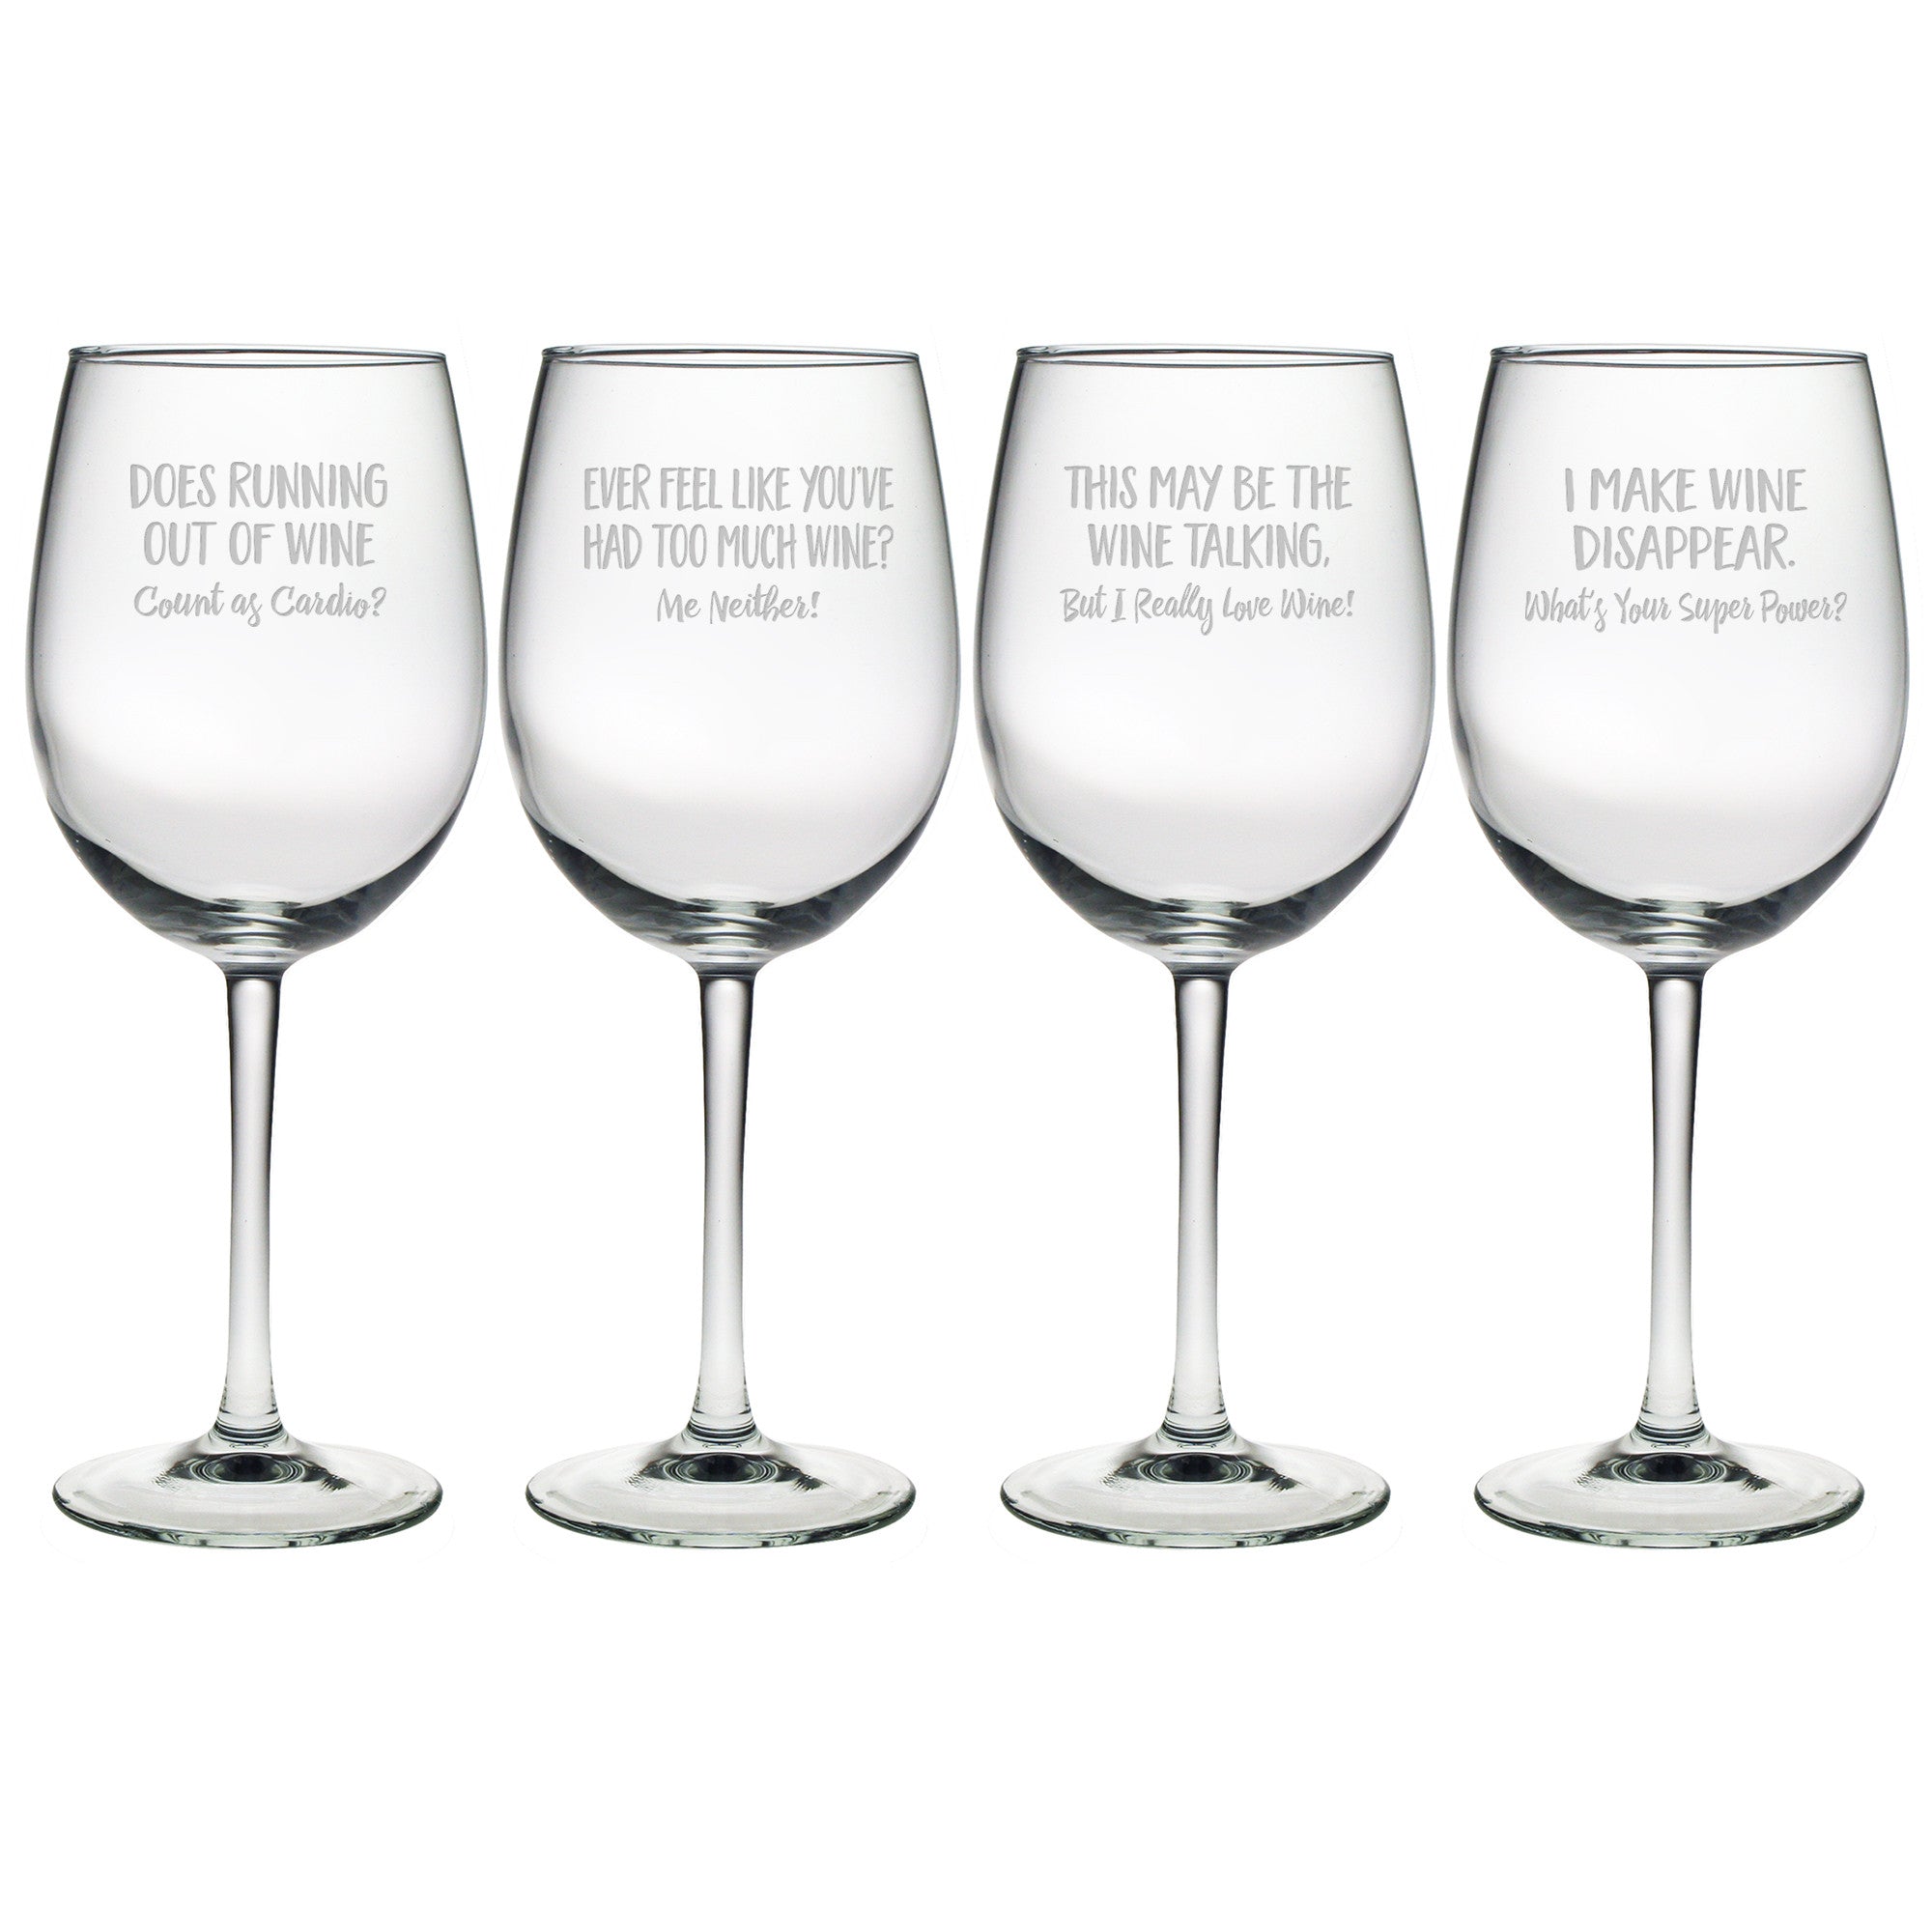 Funny Stemless Wine Glass Set - 4 Count